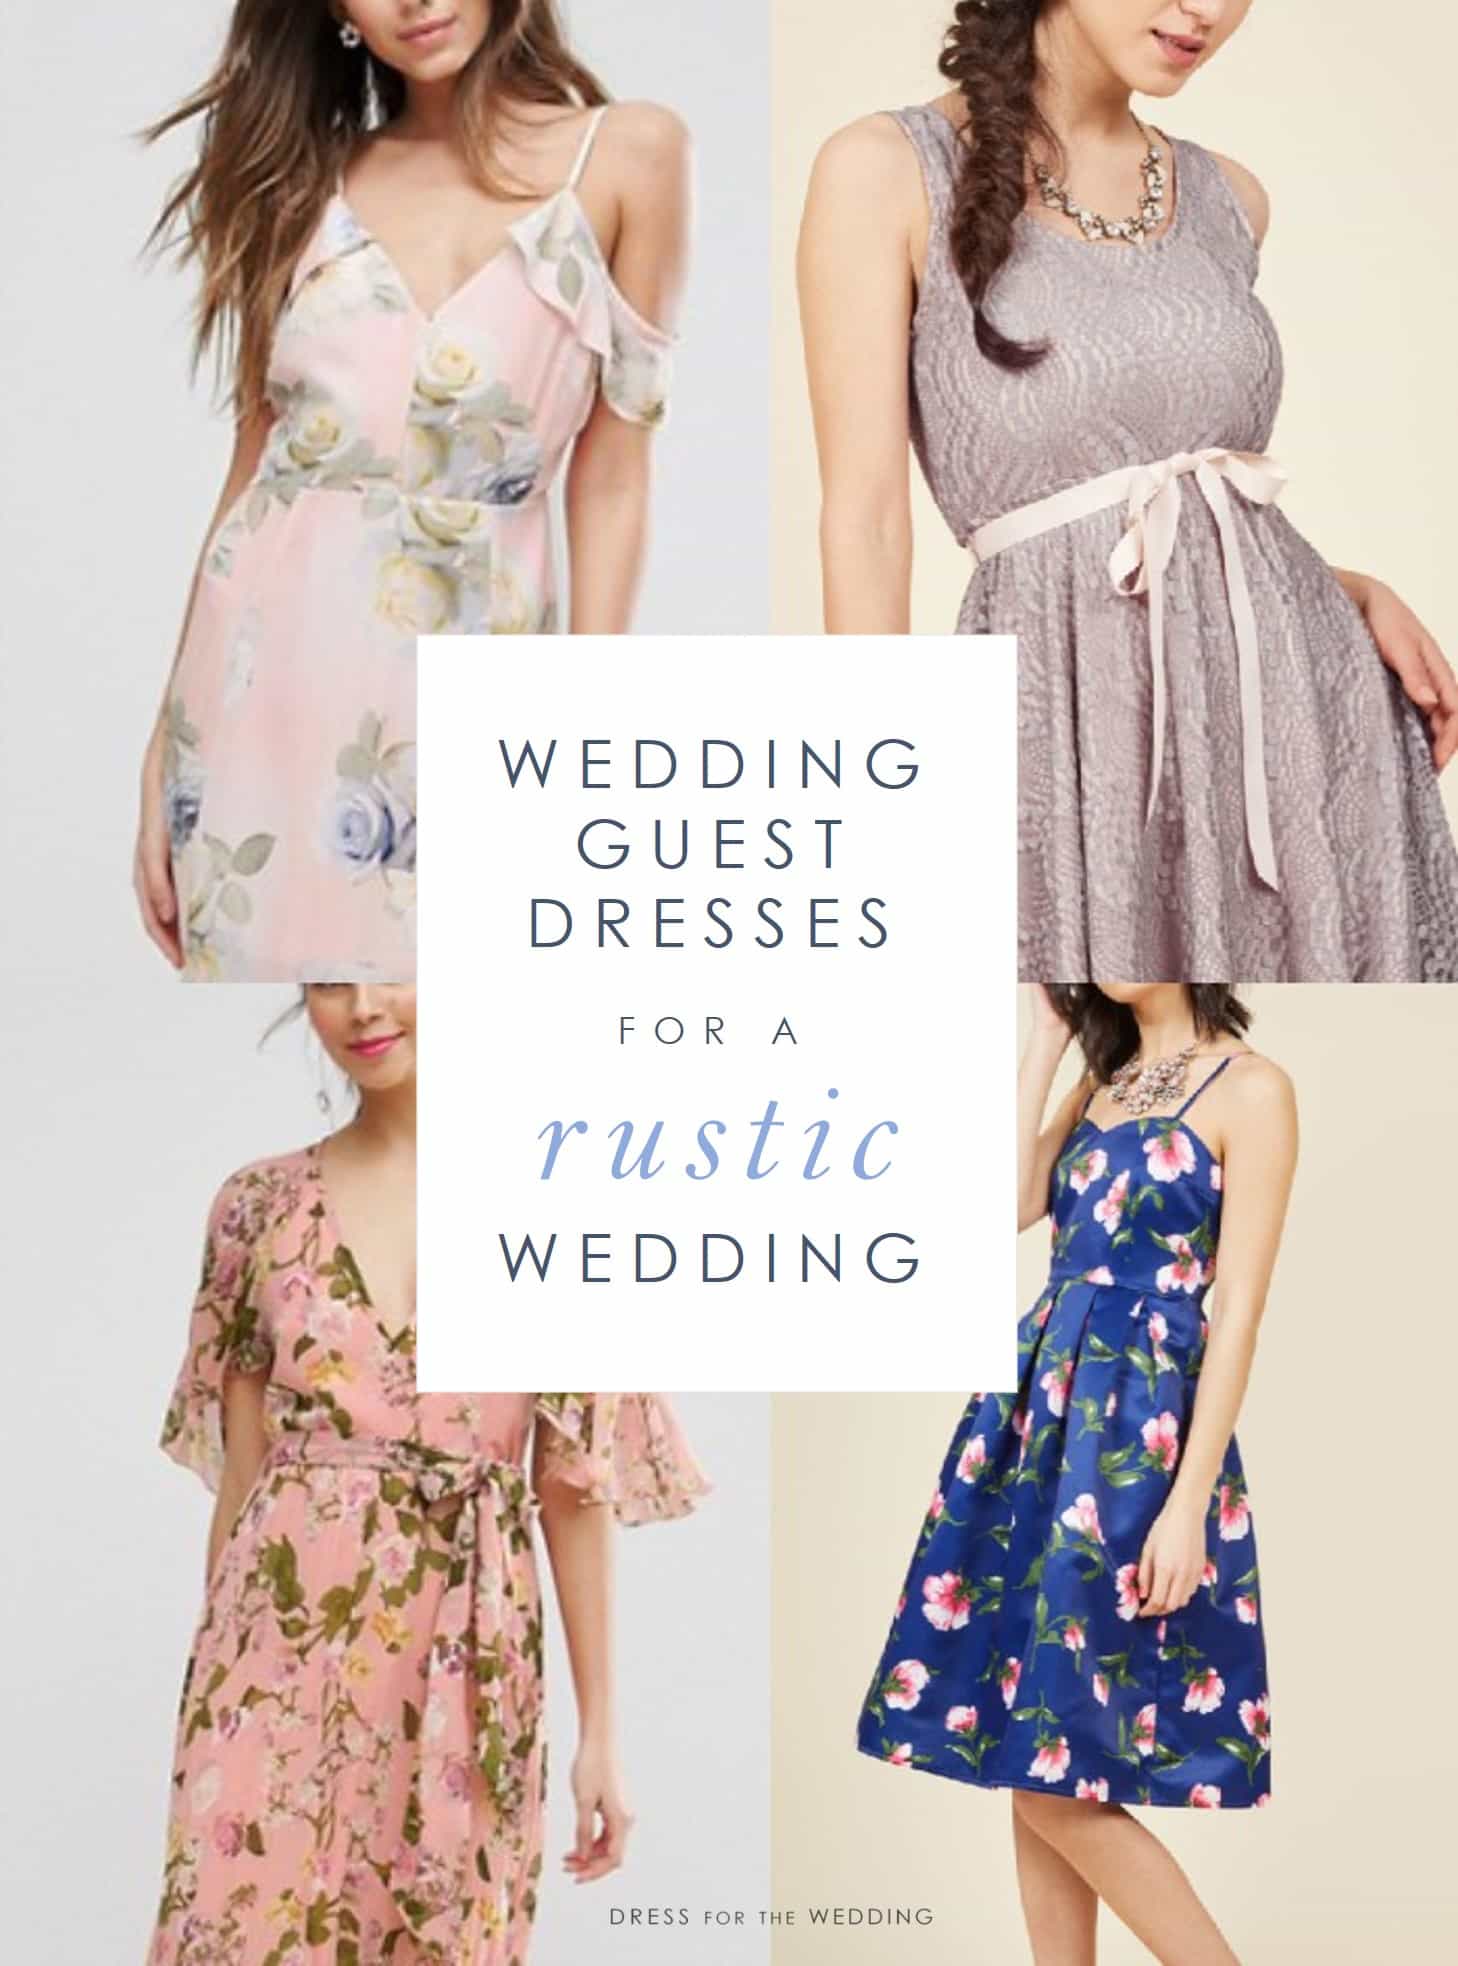 What Should A Guest Wear To A Rustic Wedding